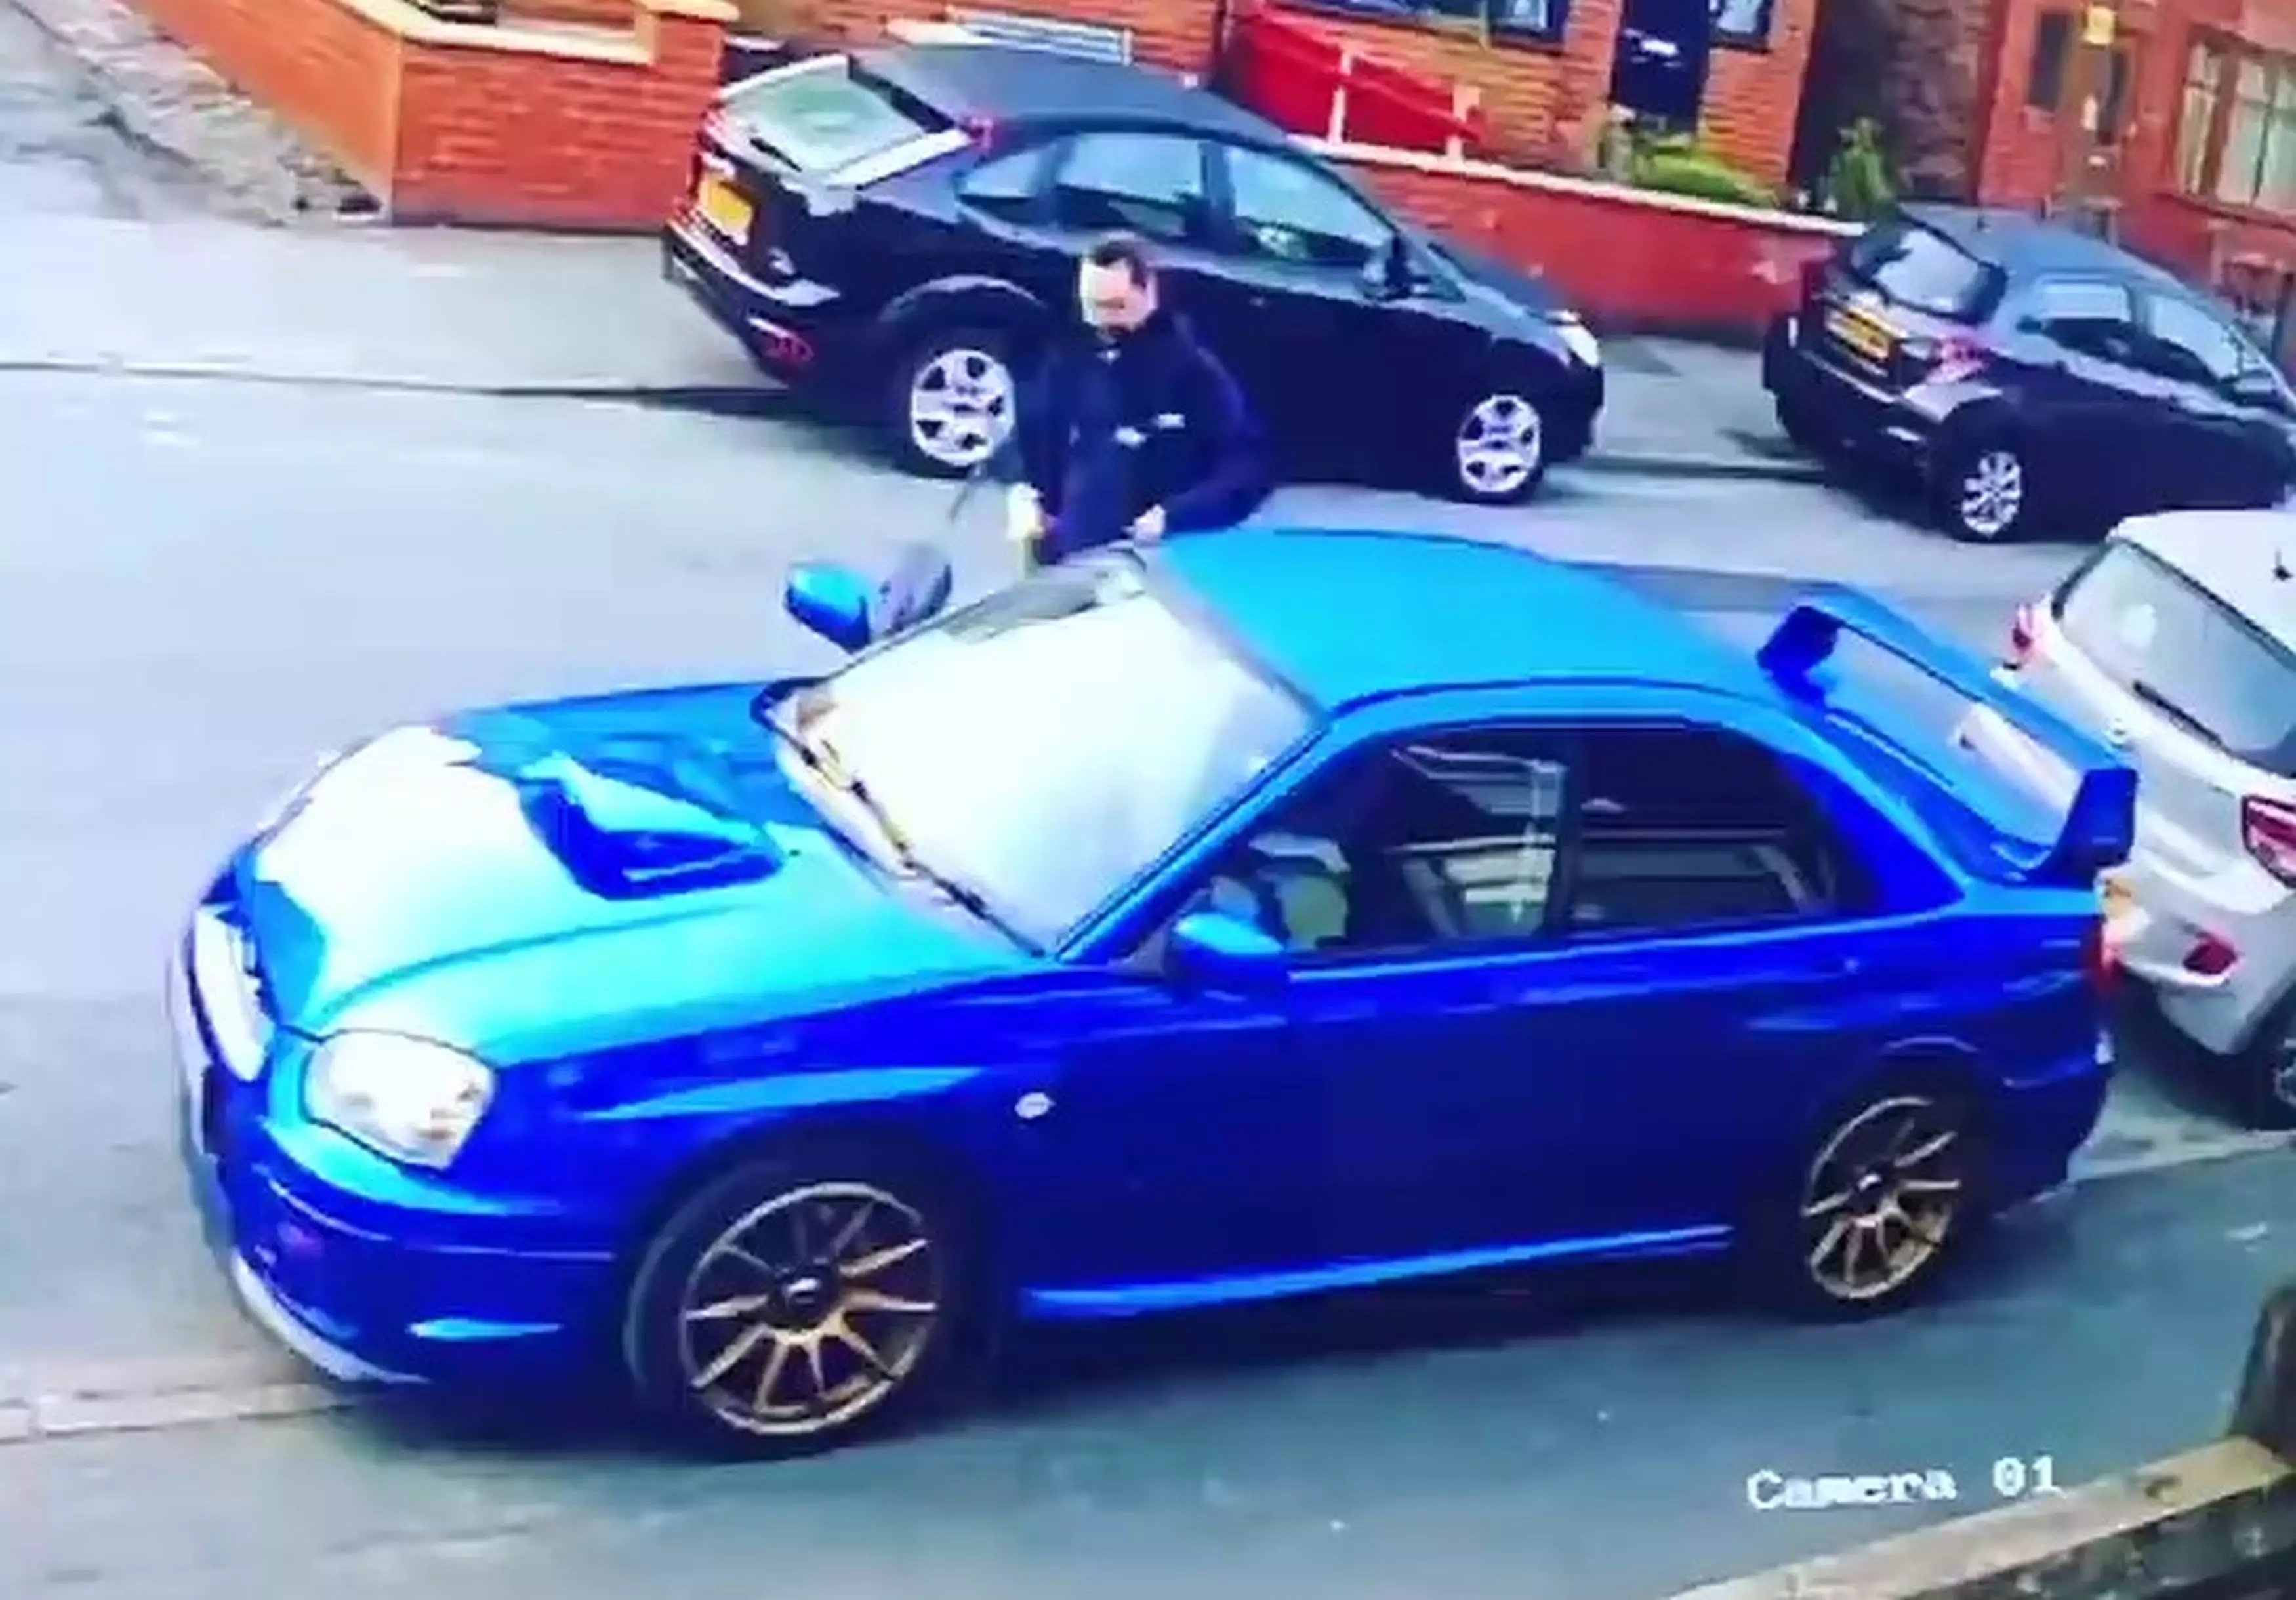 The dispute over the noisy car got out of hand.